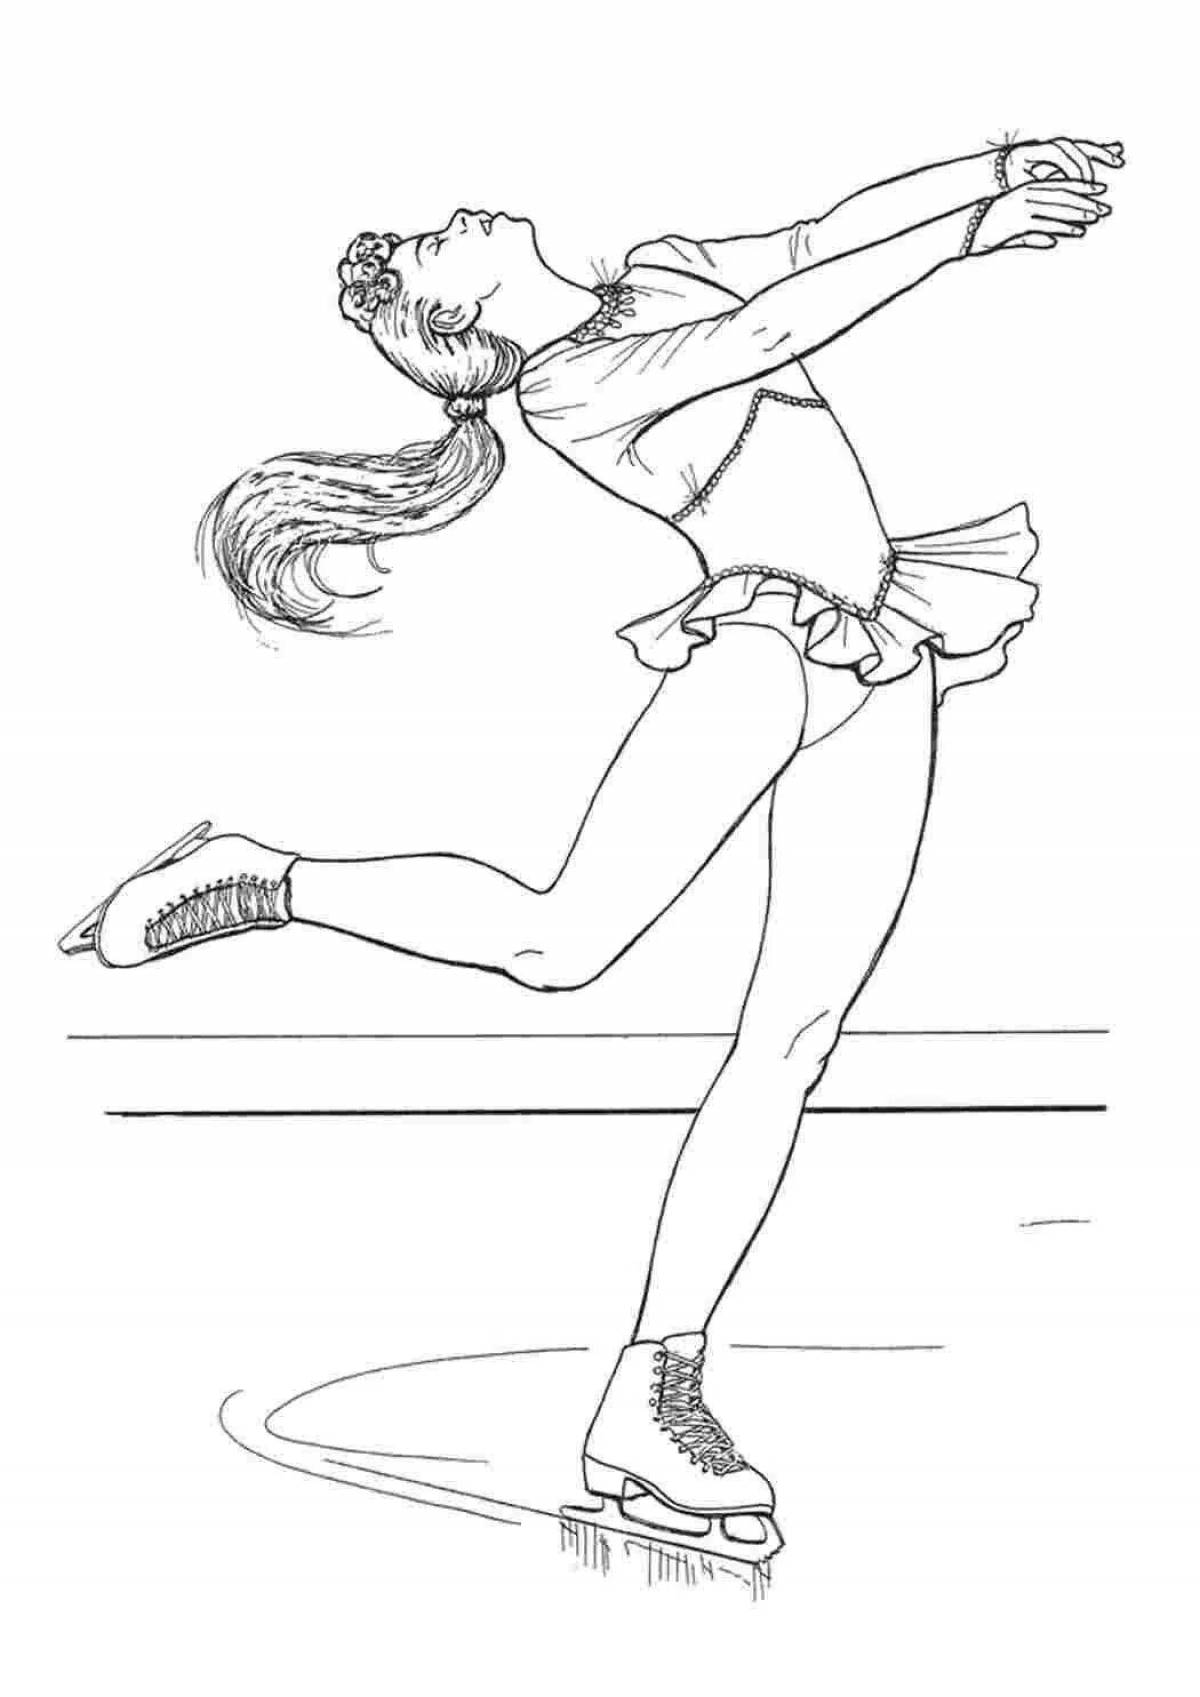 Exciting figure skater girl coloring book